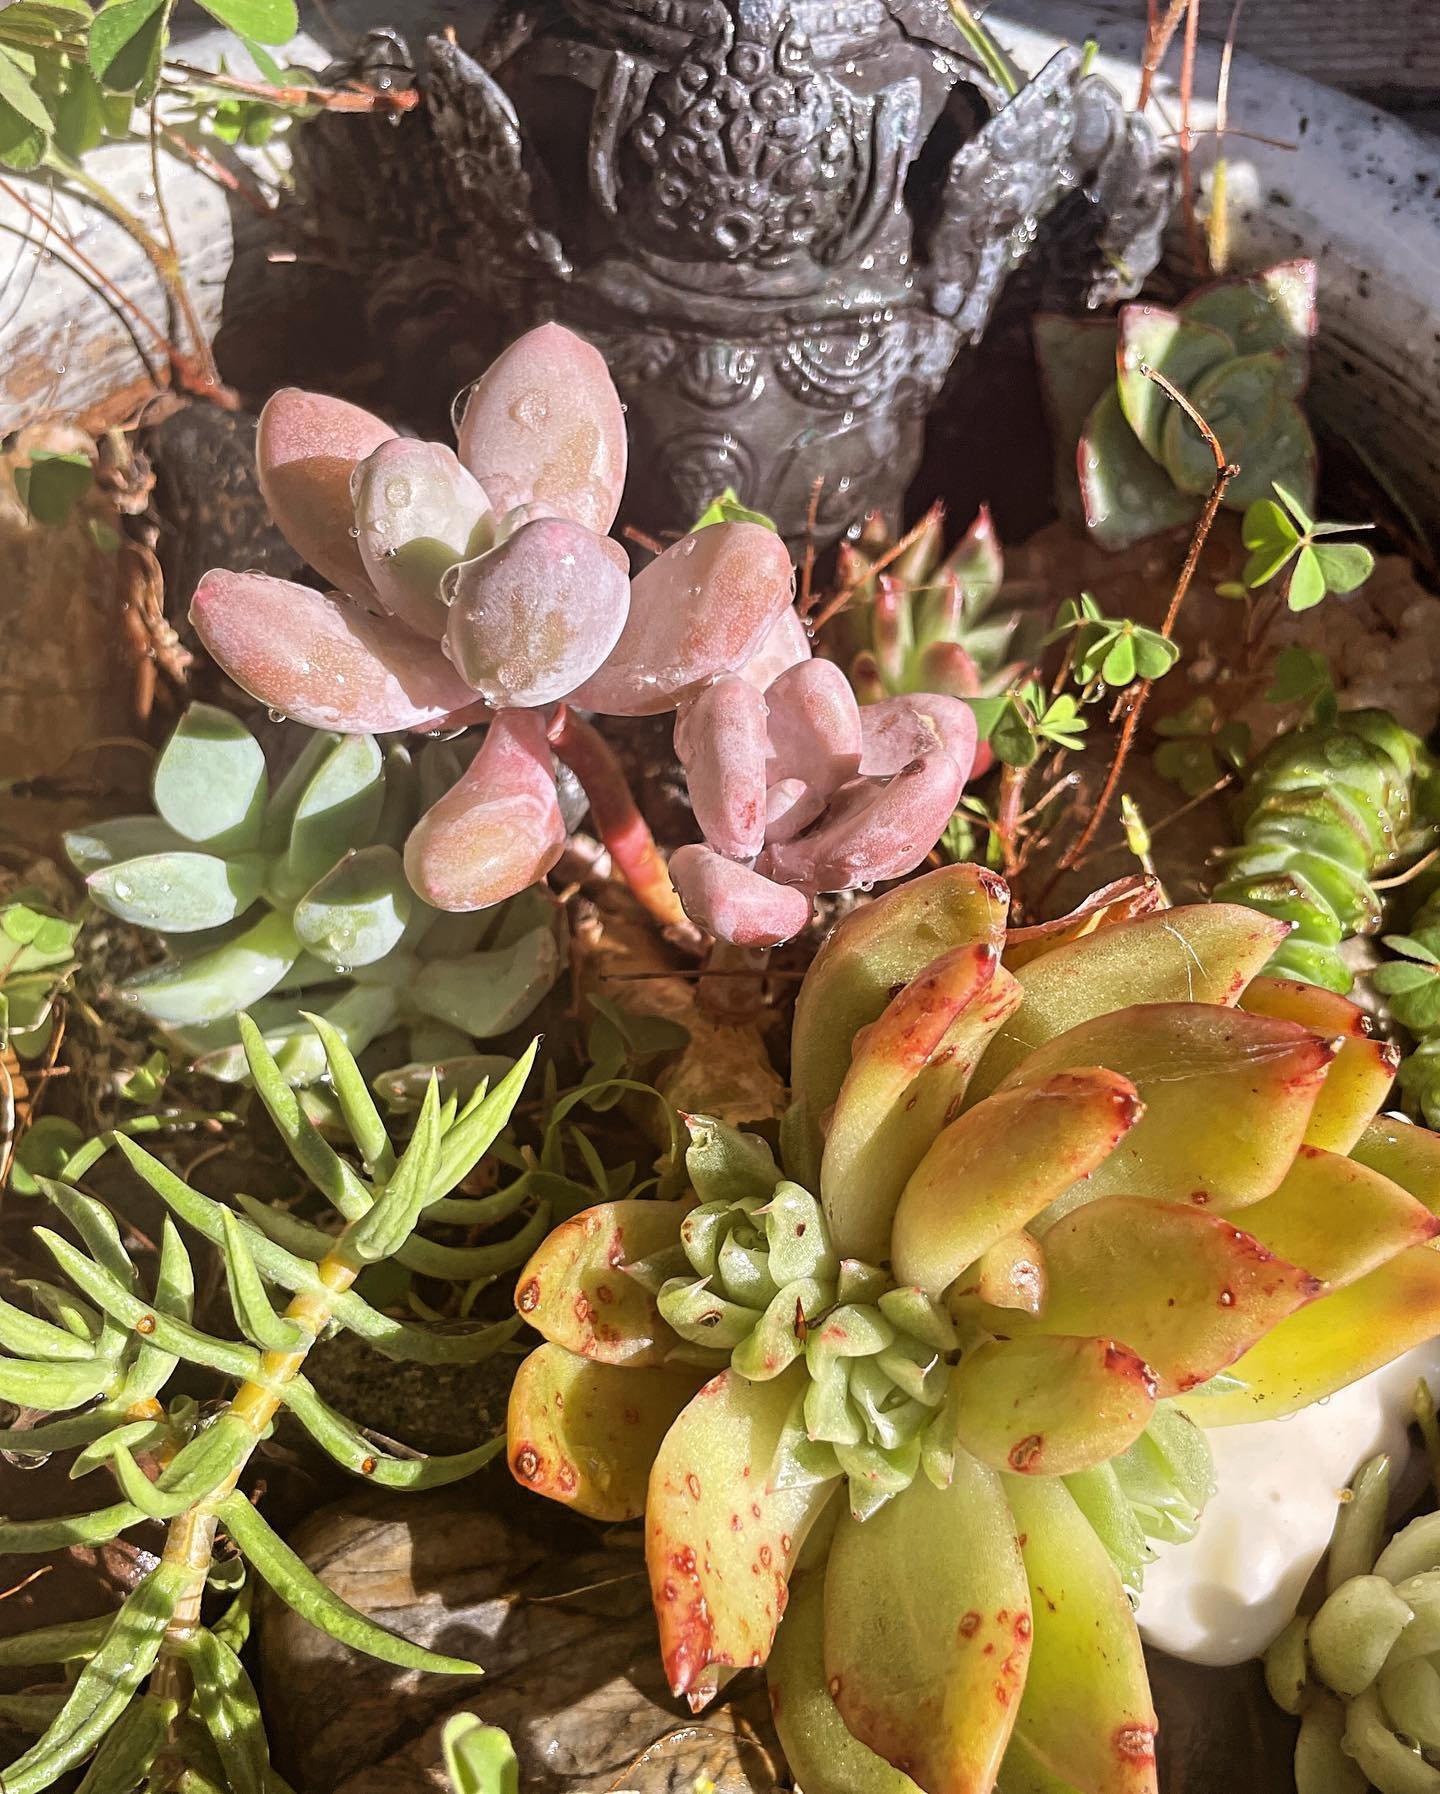 Everything is connected energetically, beauty May even bury the obstacles by accepting them graciously &amp; moving on confidently 🙌🏽🌬🌊💃🏽 @manifestationbabe 
#magneticmoneymb  #movethroughmudras 🧘🏻&zwj;♀️
#succulentlove #riverflowsinyou #beyo